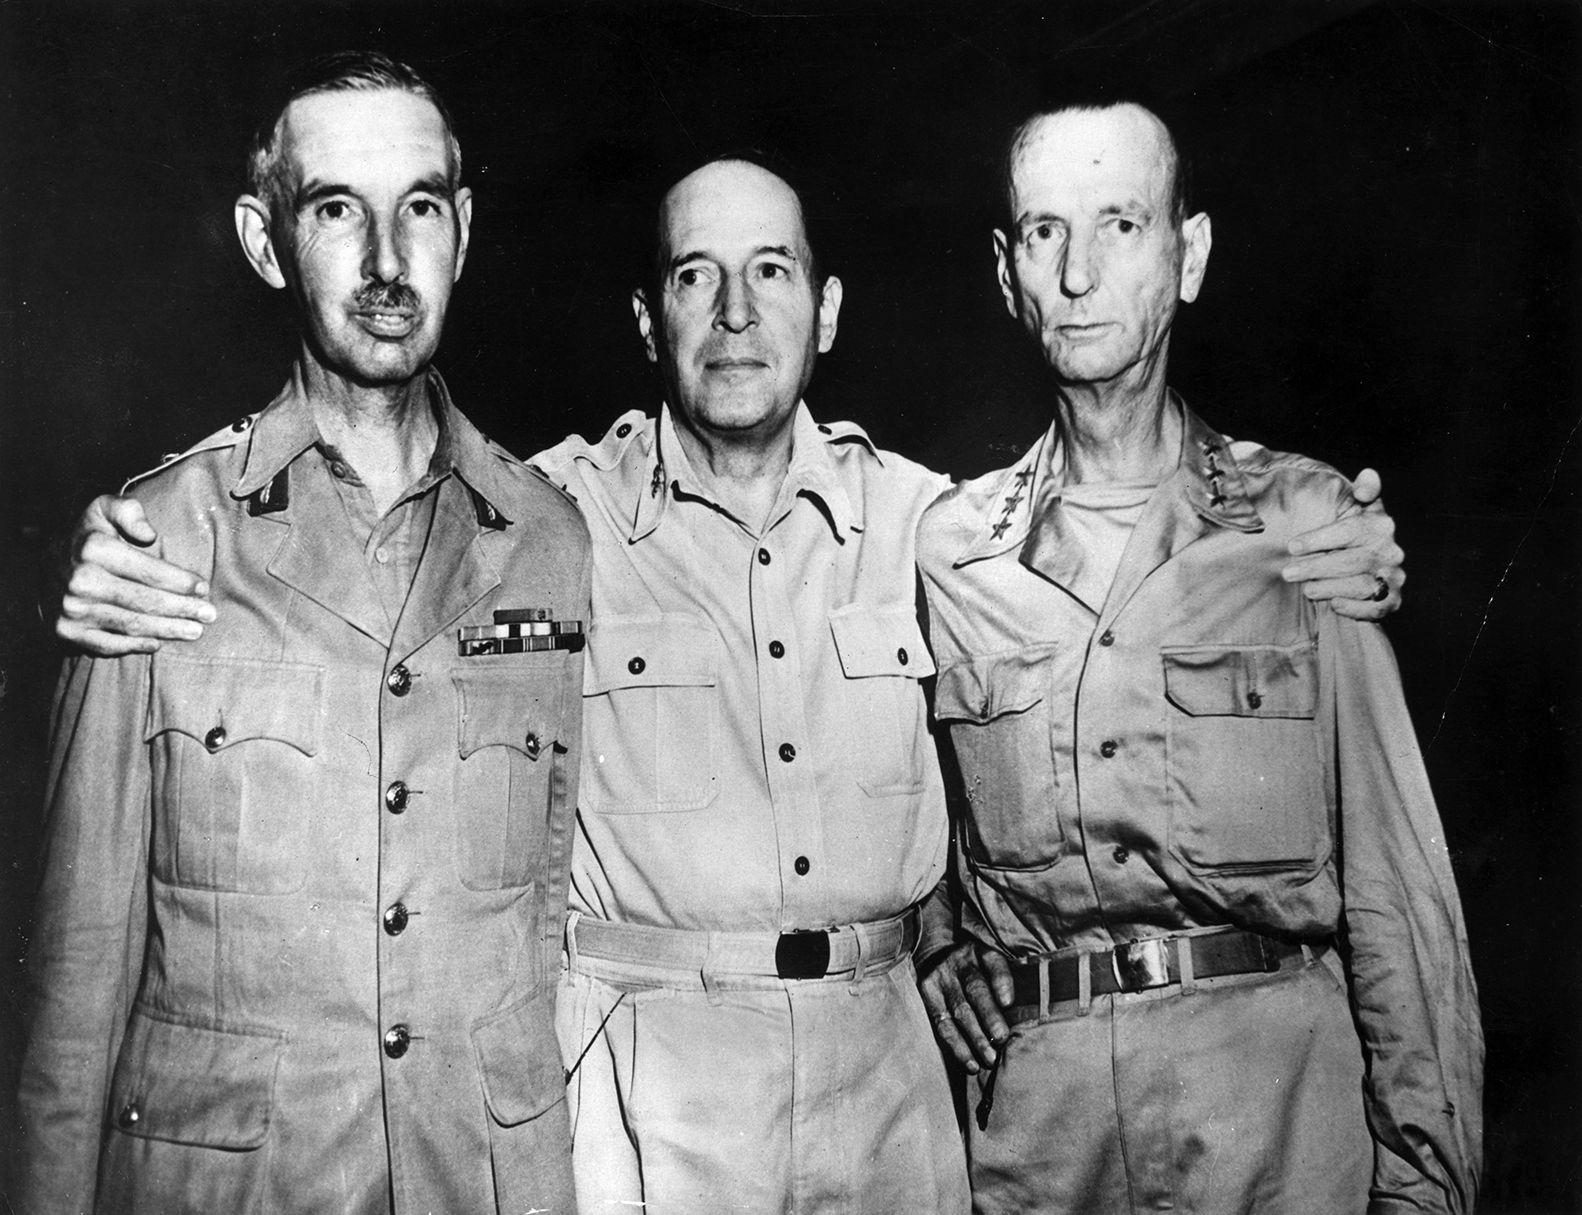 Percival, left, with General Douglas MacArthur (center). On the right is General Jonathan M. Wainwright, who surrendered Allied troops in the Philippines to the Japanese in the spring of 1942 and also endured harsh captivity. Both liberated commanders were present with MacArthur during the surrender of Japan aboard the battleship USS Missouri in Tokyo Bay, September 2, 1945.